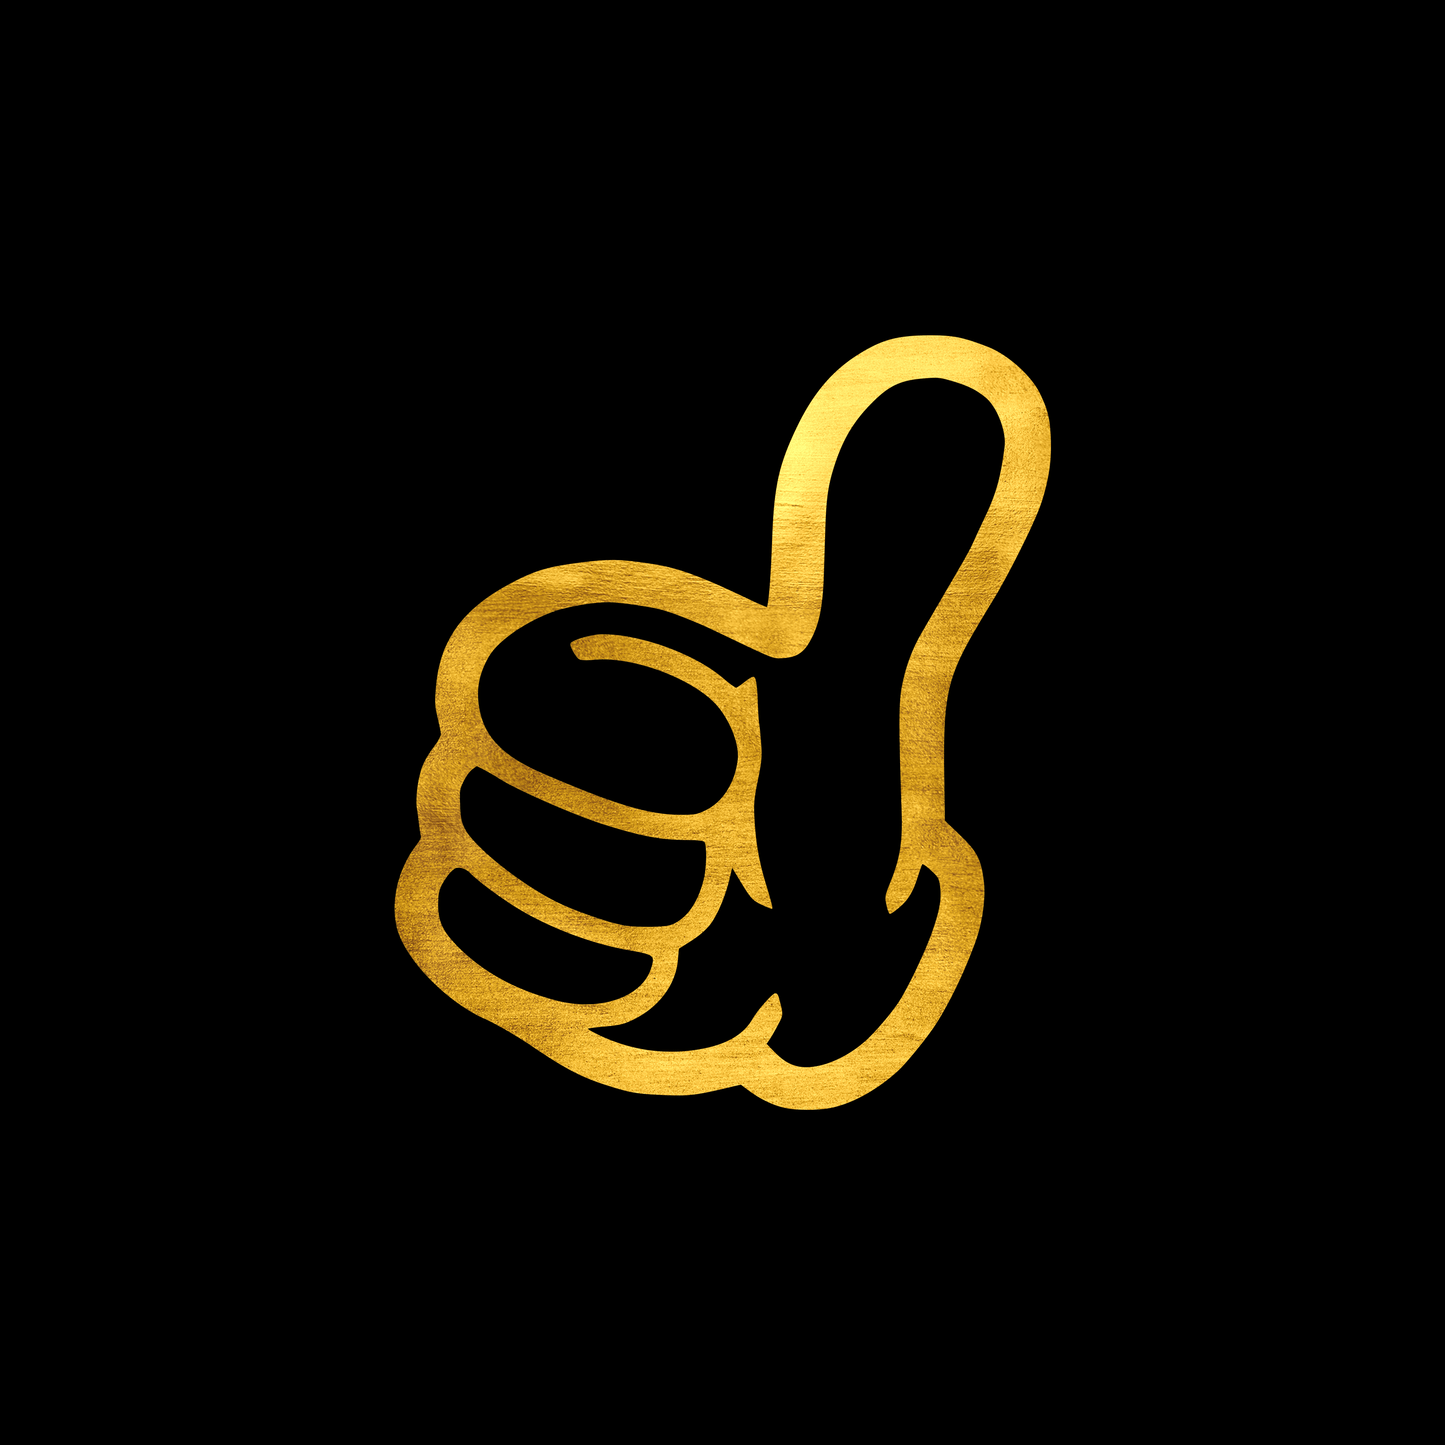 Thumbs up sticker decal